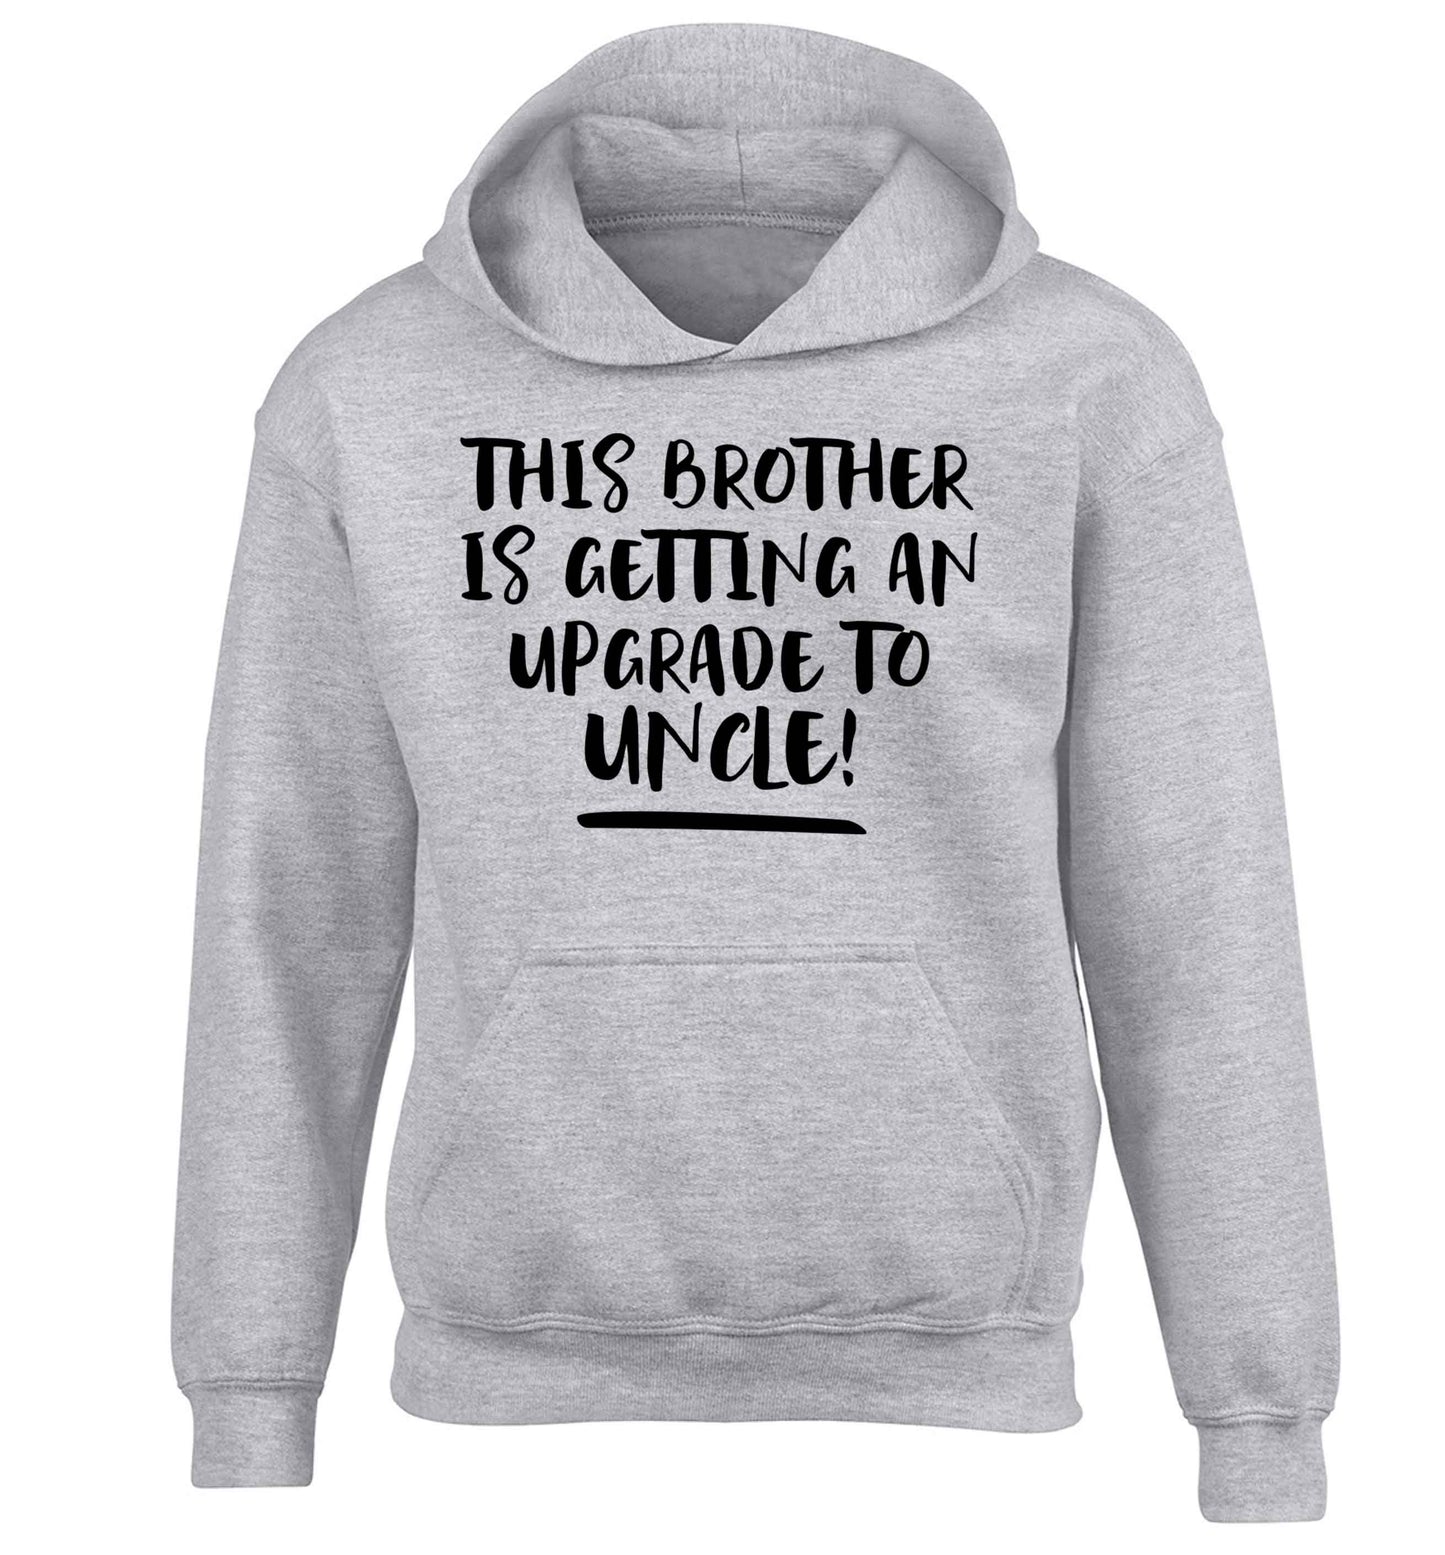 This brother is getting an upgrade to uncle! children's grey hoodie 12-13 Years